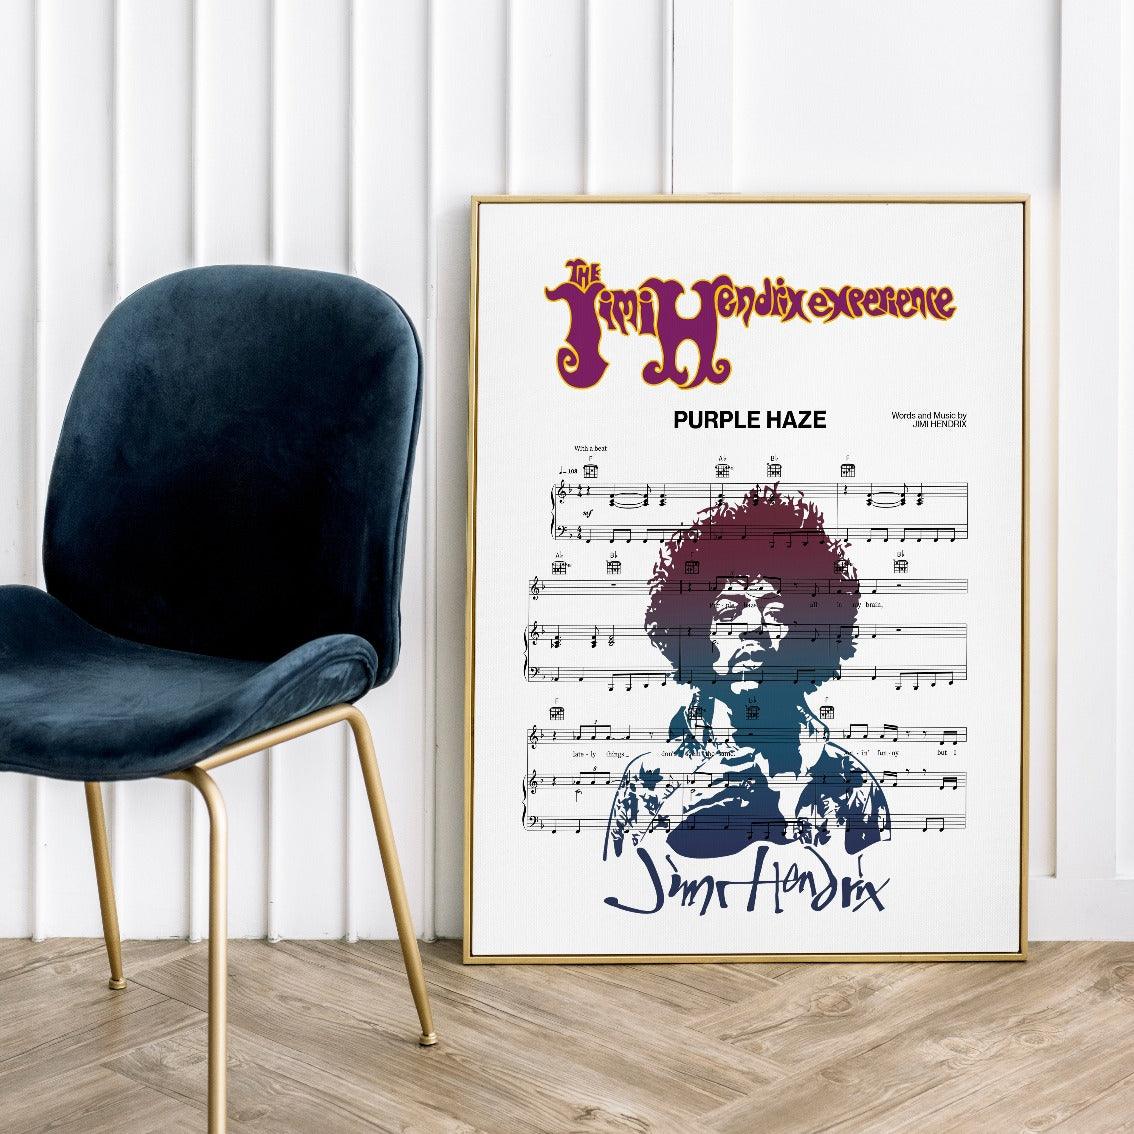 Print lyrical with these unusual and Natural High quality black and white musical scores with brightly coloured illustrations and quirky art print by artist The Jimi Hendrix Experience to put on the wall of the room at home. A4 Posters uk By 98types art online.